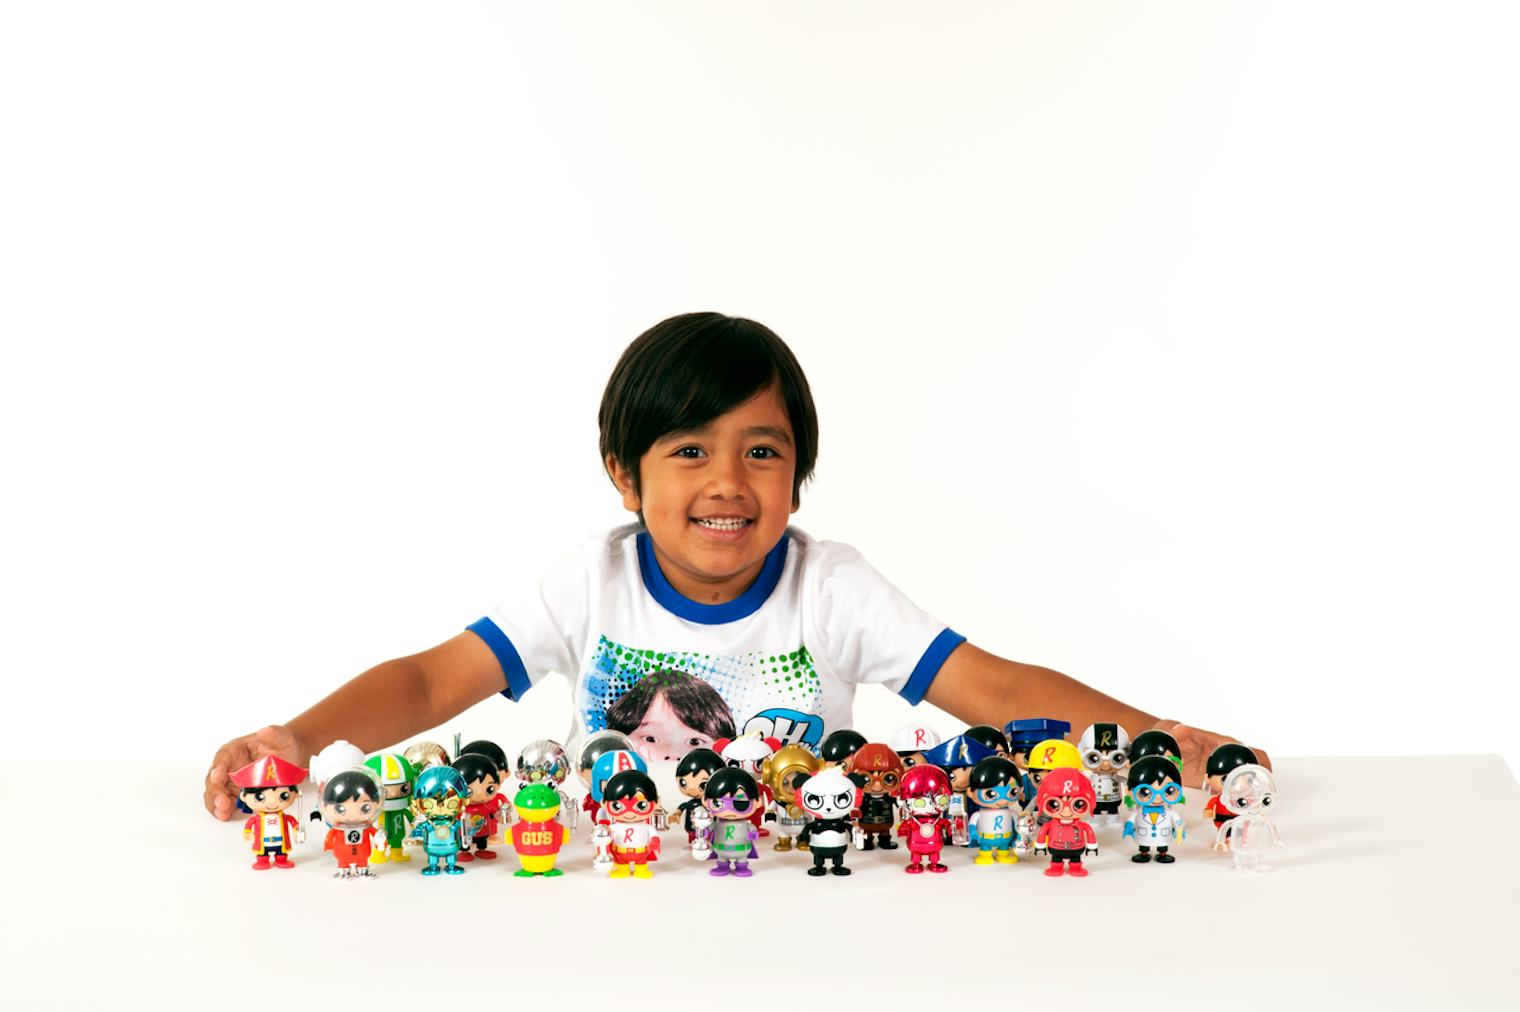 Ryan ToysReview Just Launched Ryan's World Toy Collection, & Your Kid